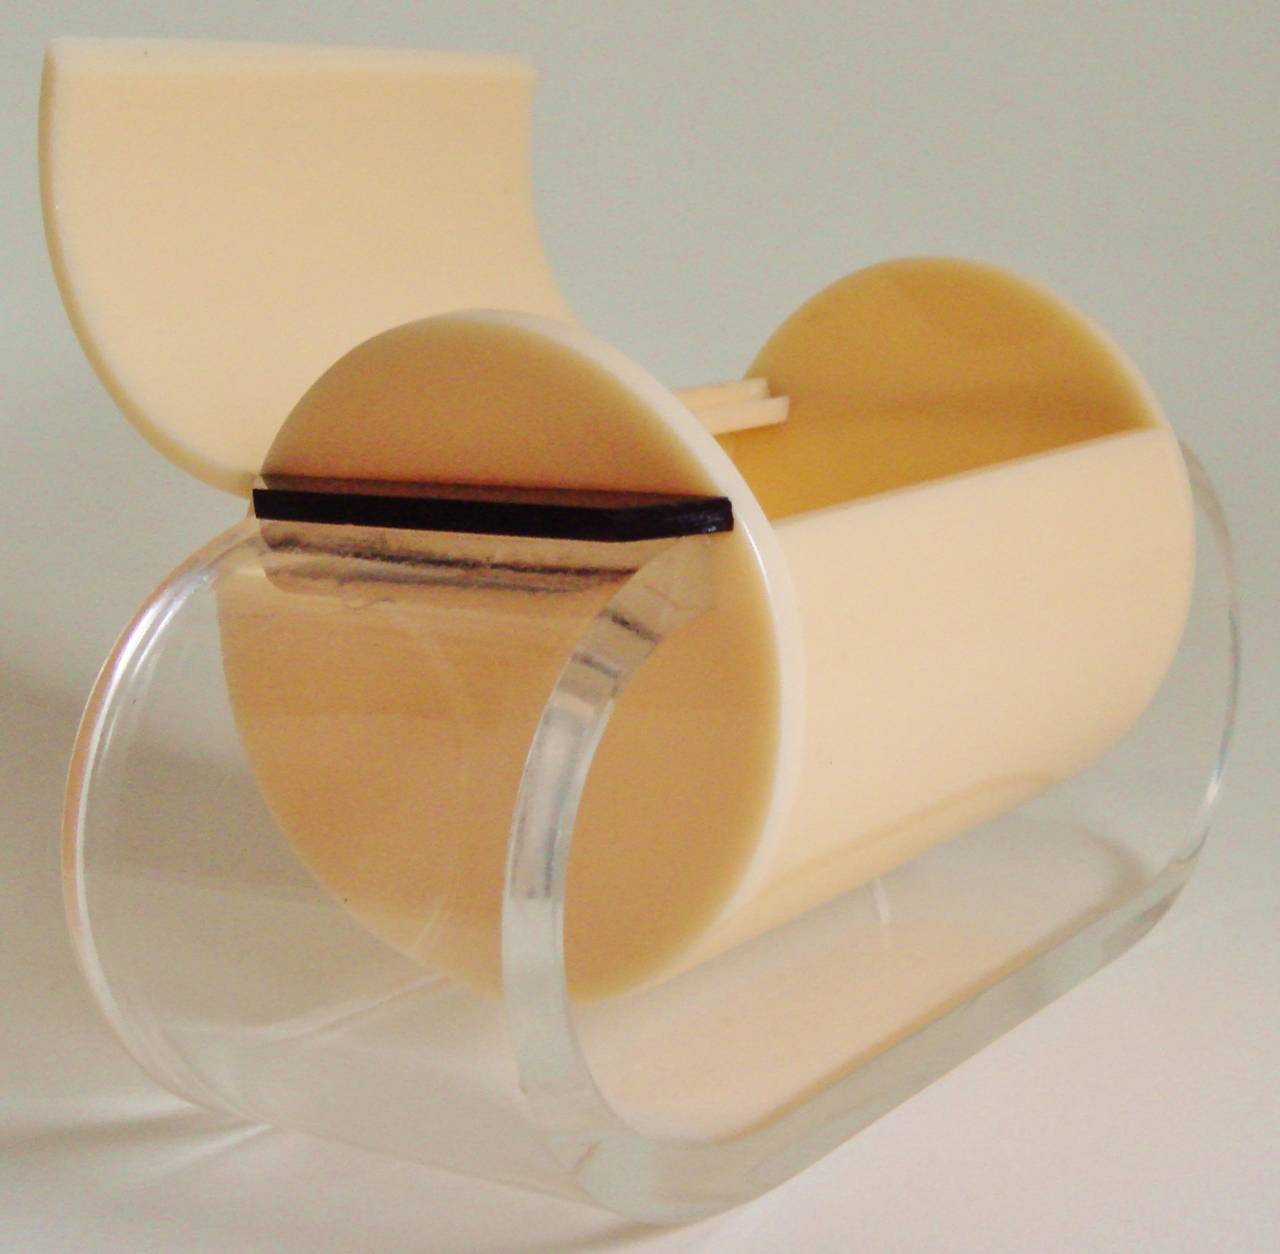 This rare and stunningly designed English Art Deco vanity box consists of a horizontal tubular barrel in peach Lucite with hinged lid and clear Lucite geometric handle. It is supported on a thick 